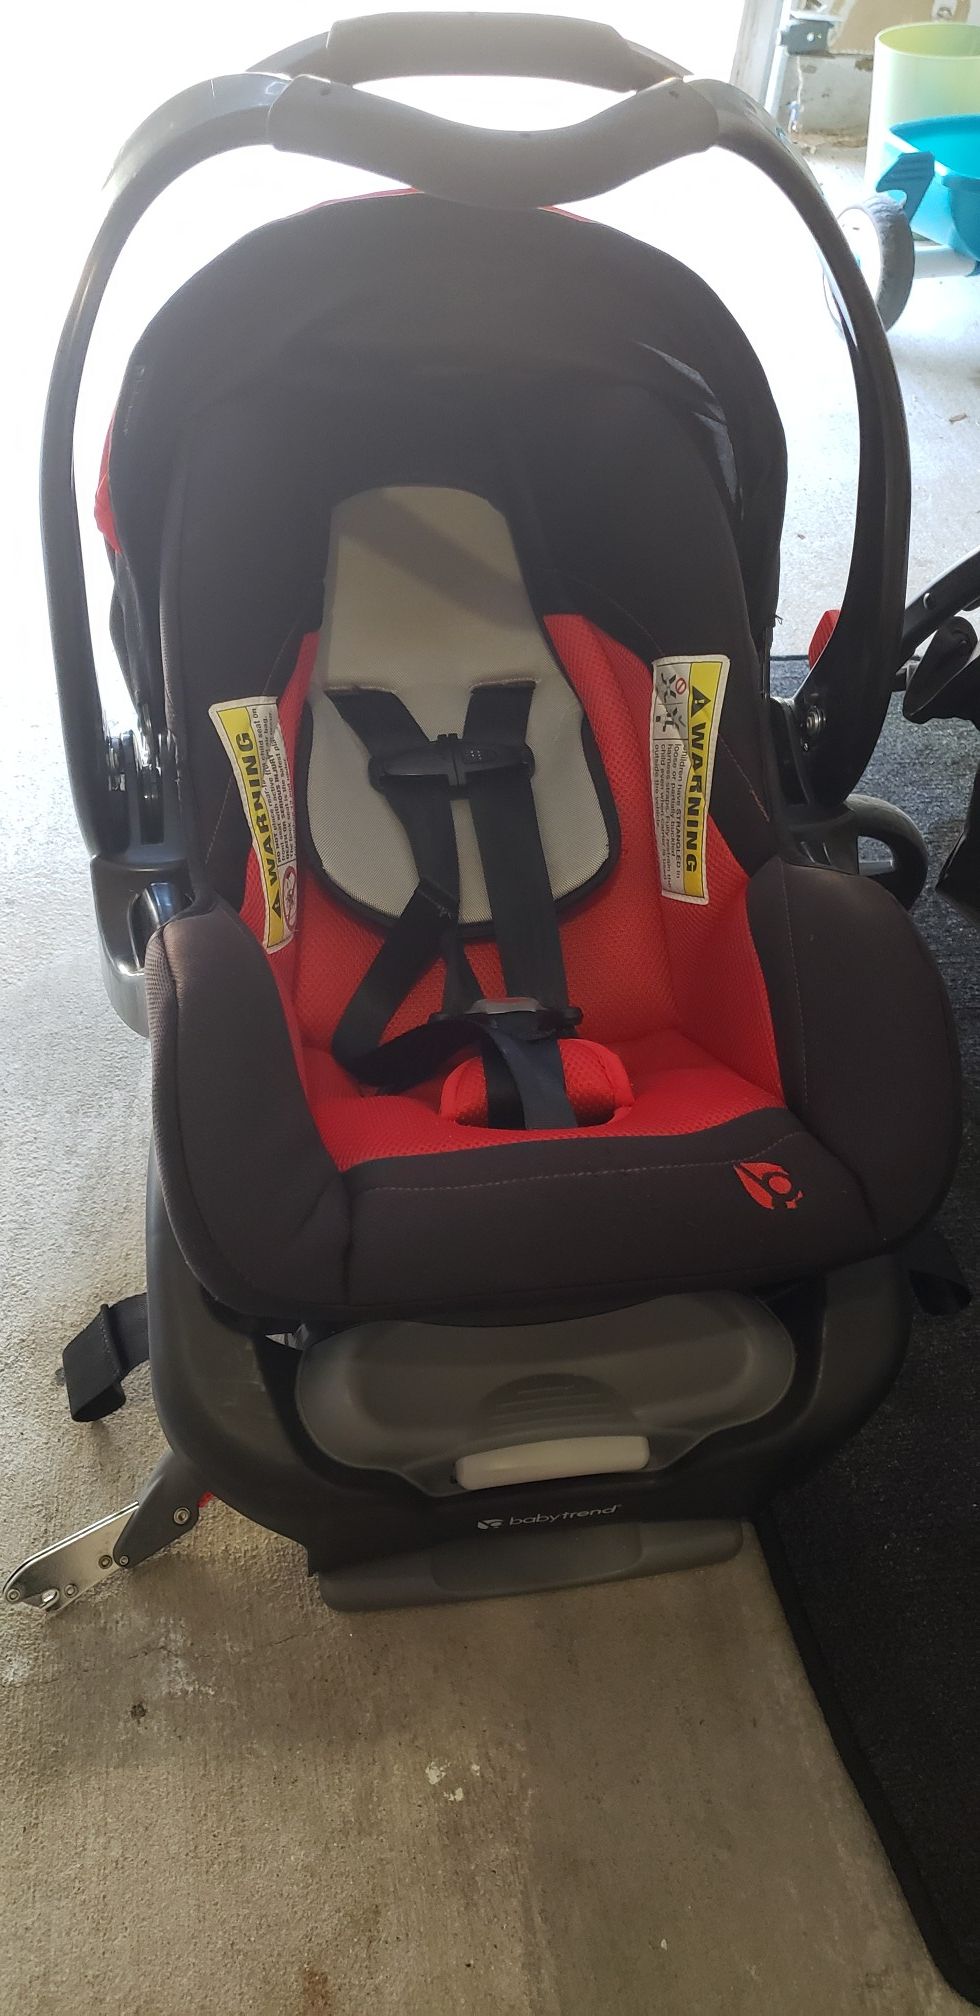 Stroller and Infant car seat